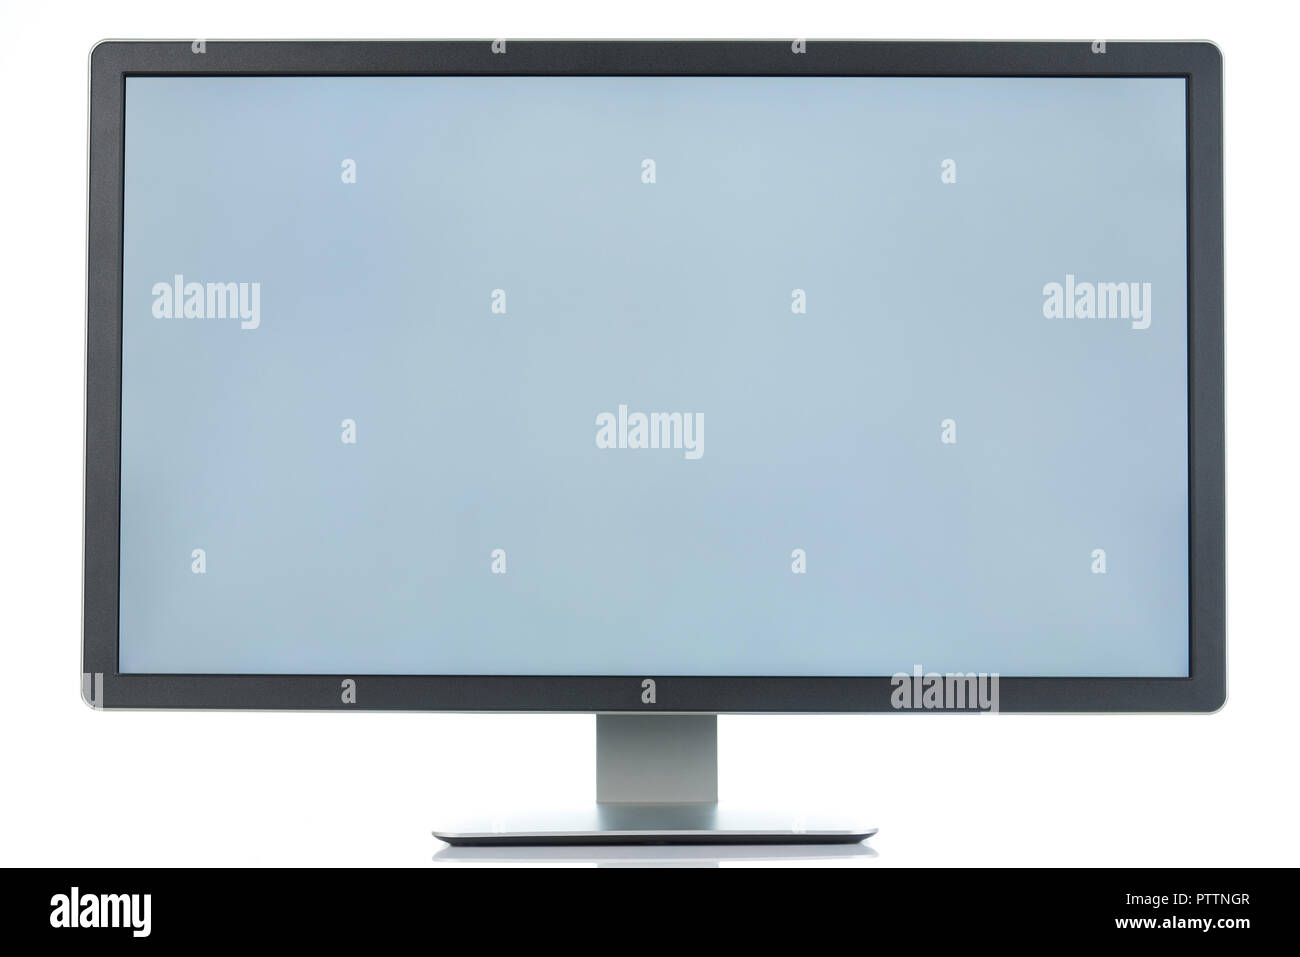 Clean pc monitor front view isolated on white background Stock Photo